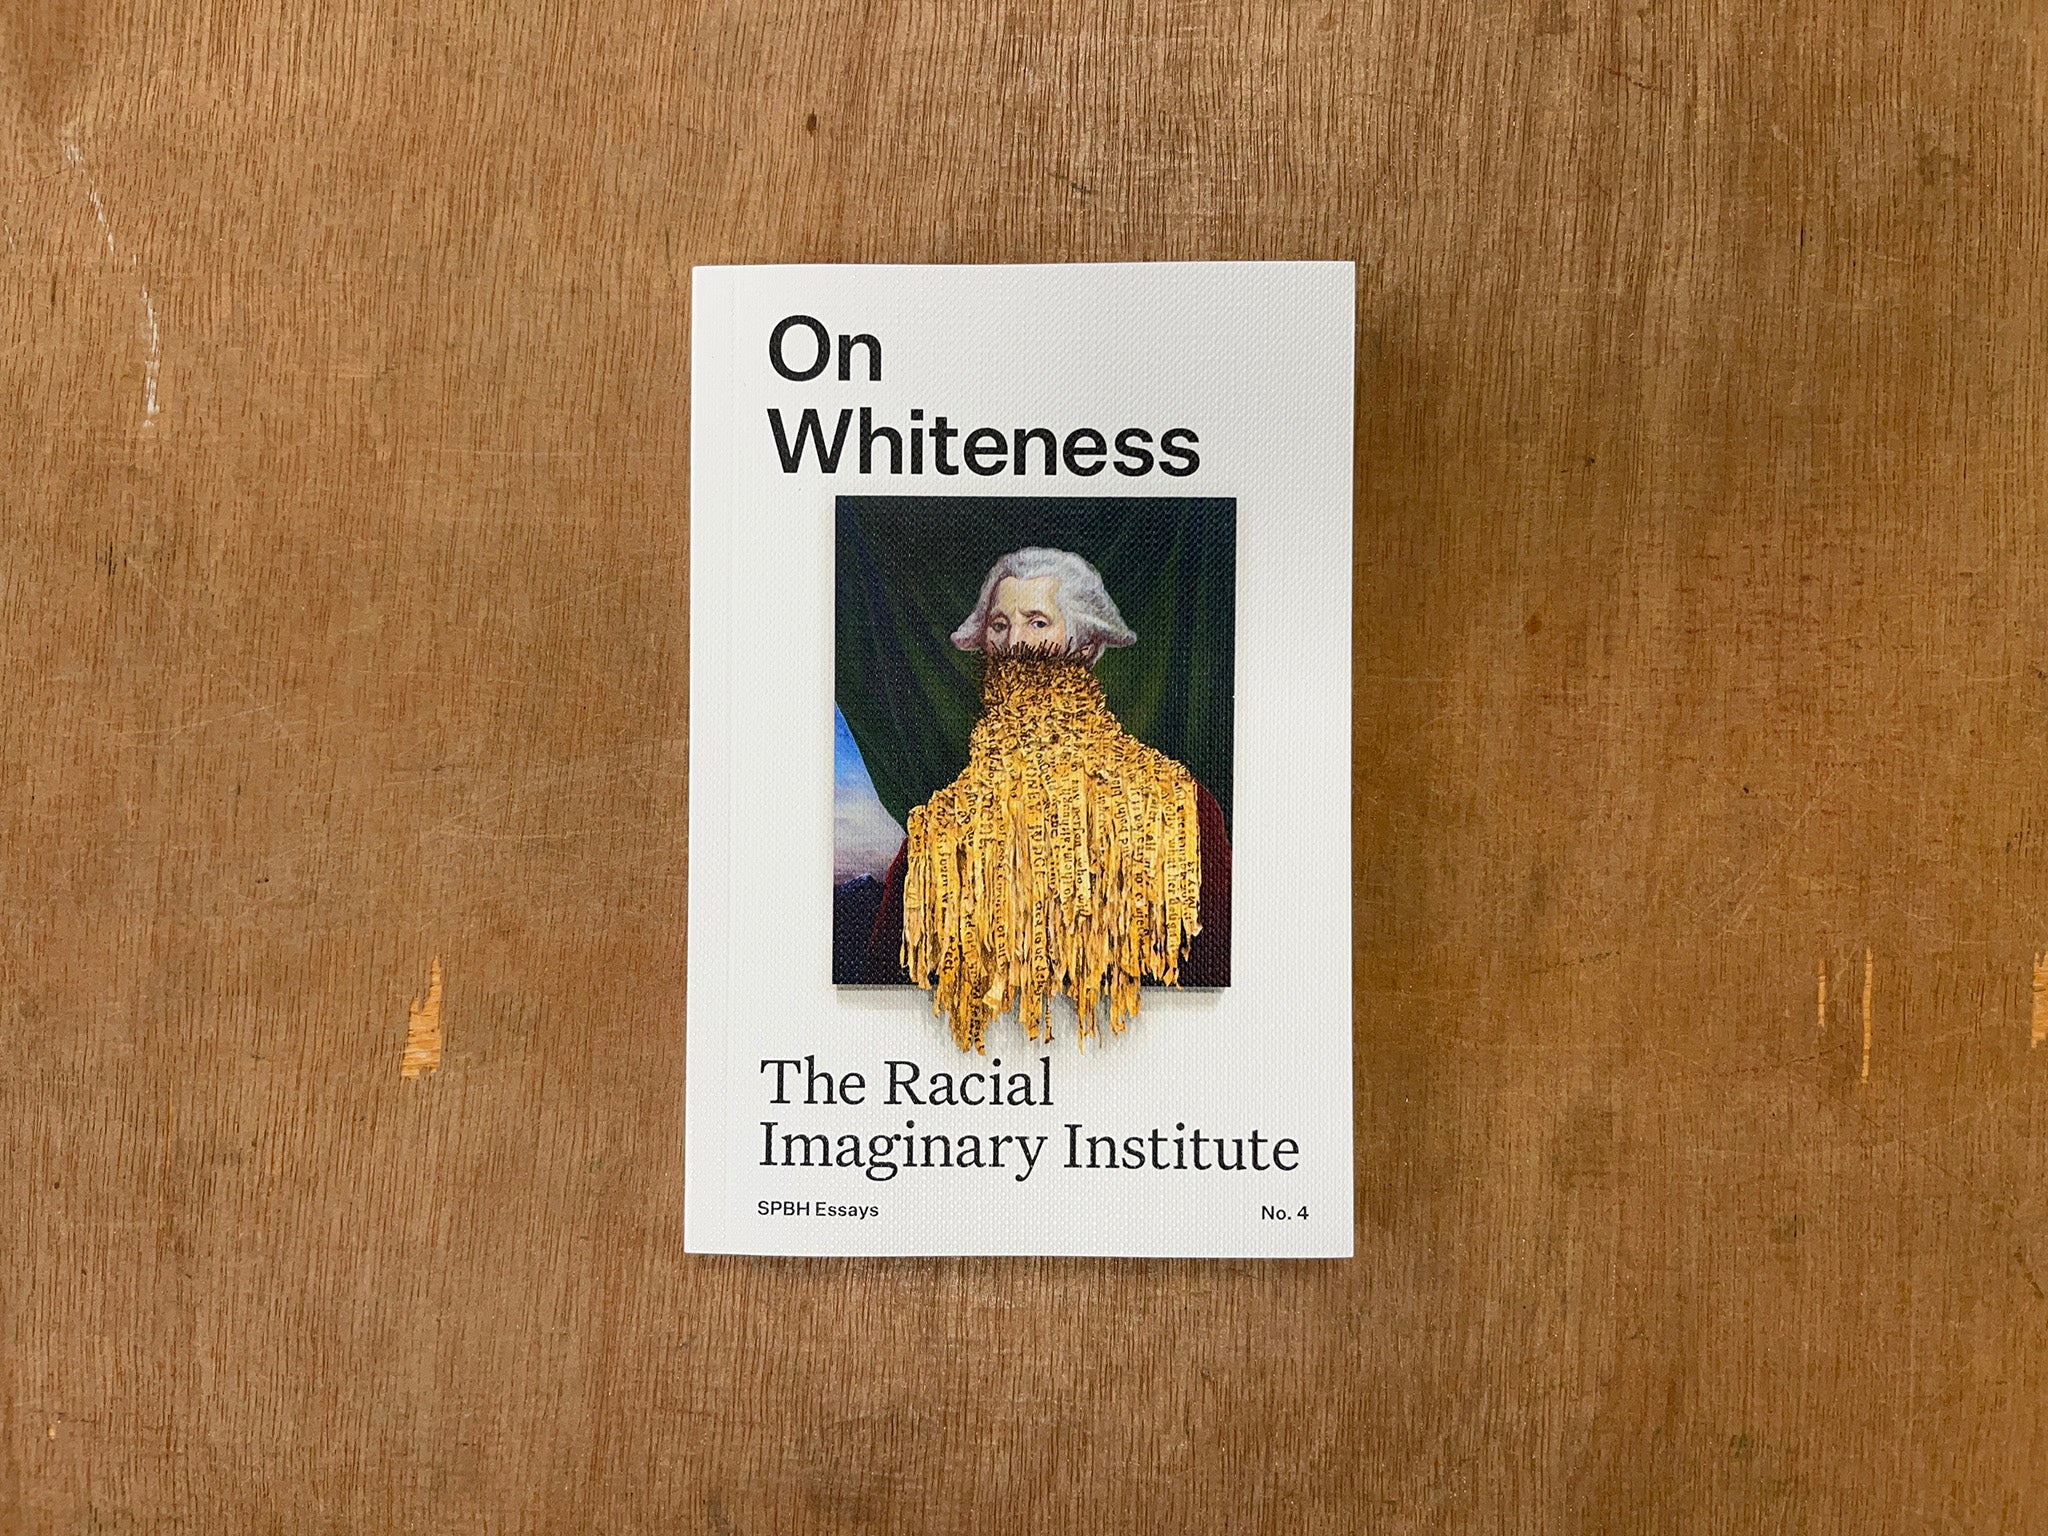 ON WHITENESS by The Racial Imaginary Institute